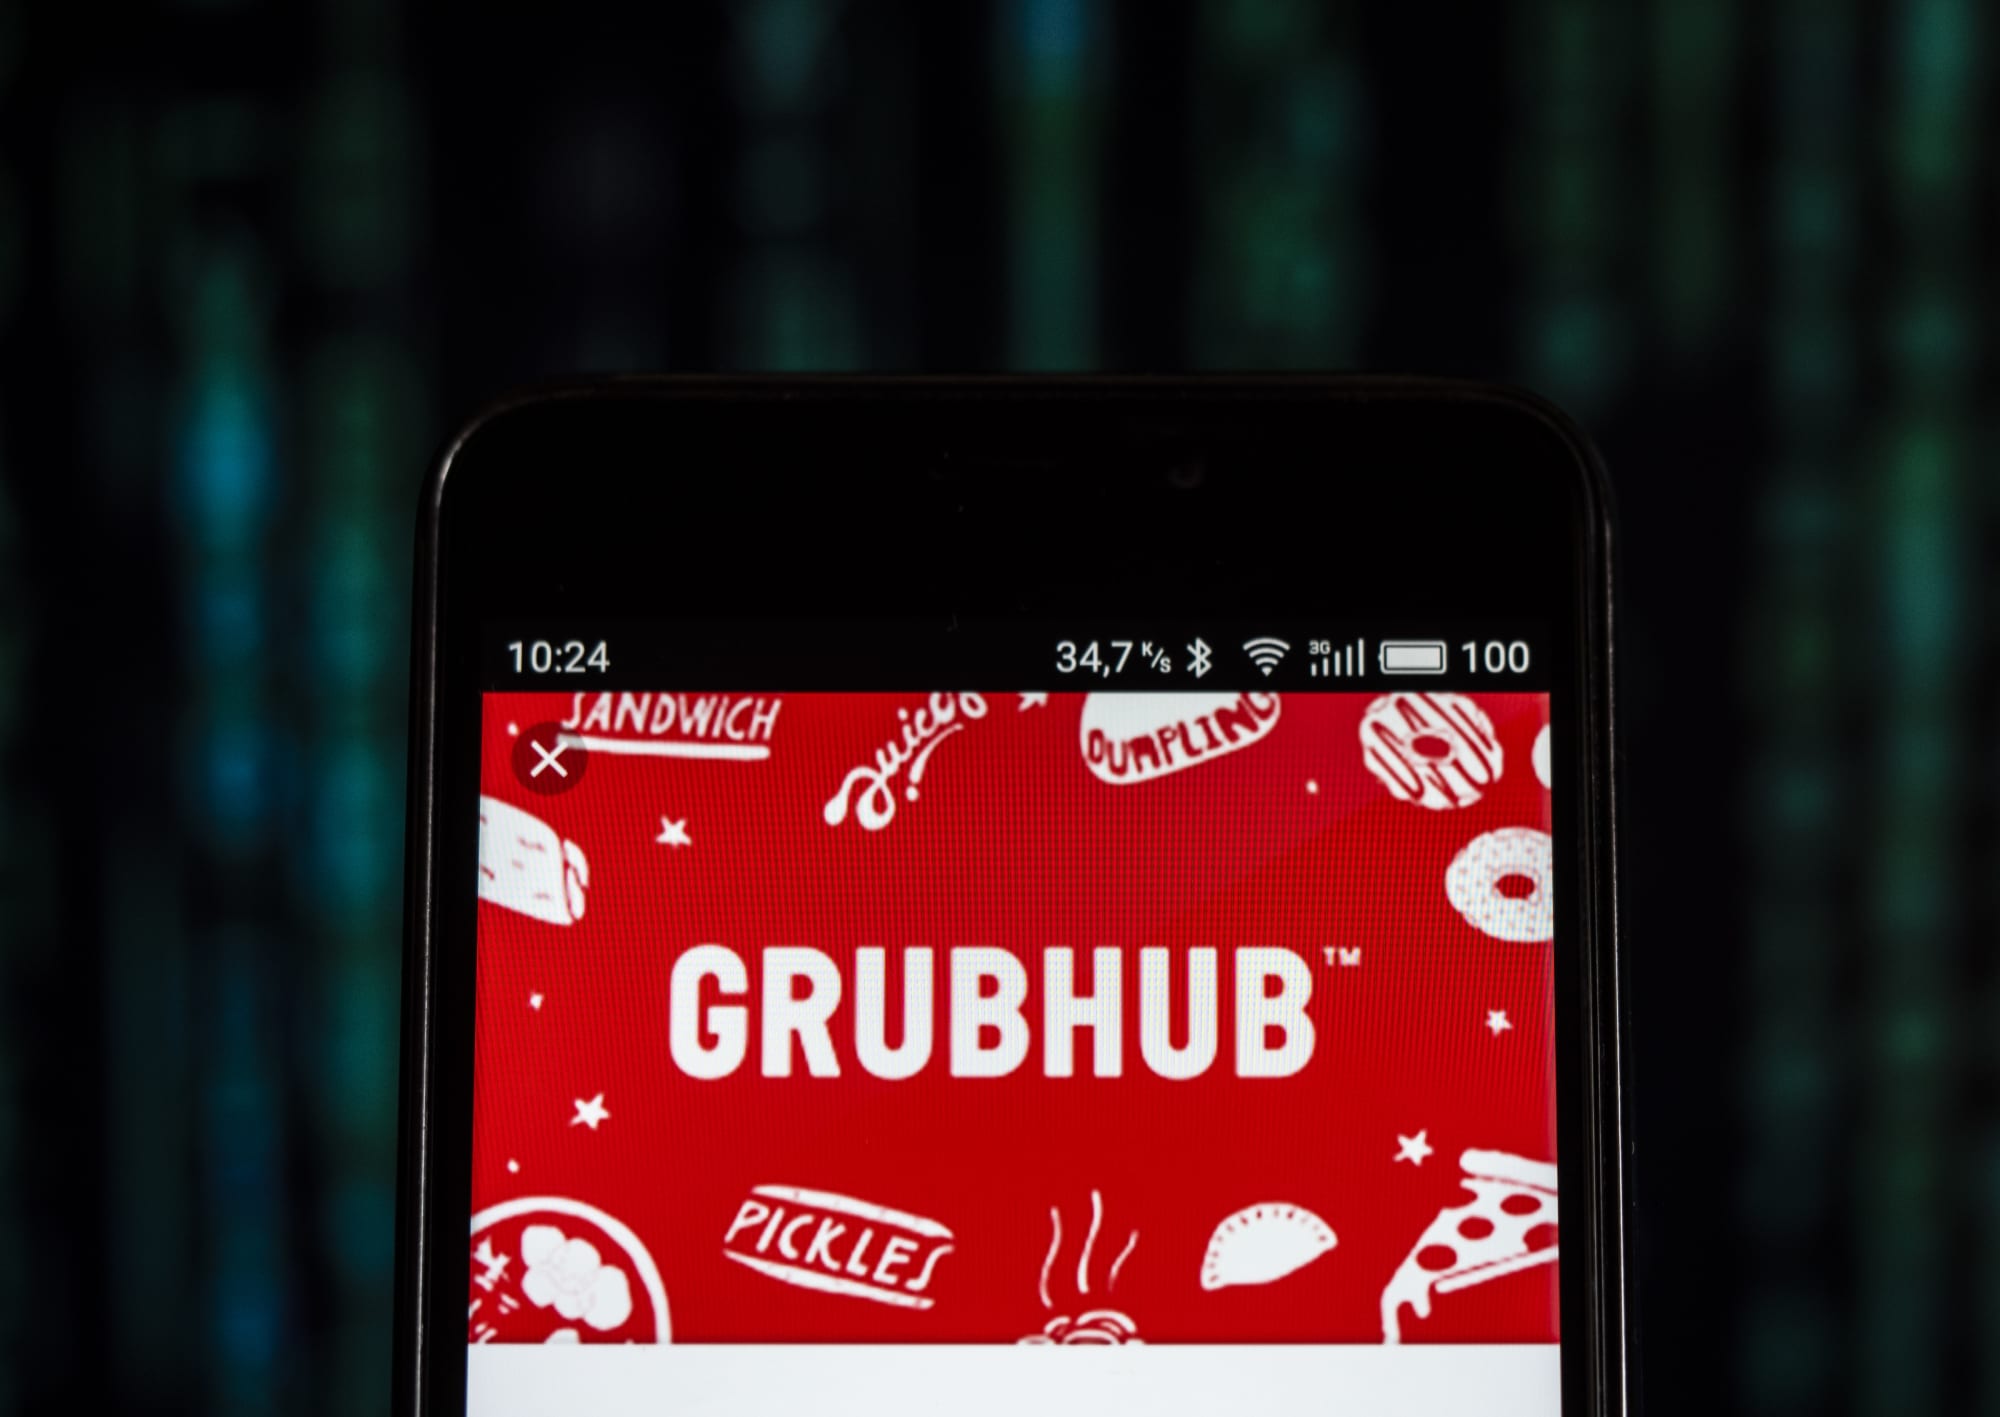 Does UberEats or GrubHub deliver on Christmas Eve 2018?